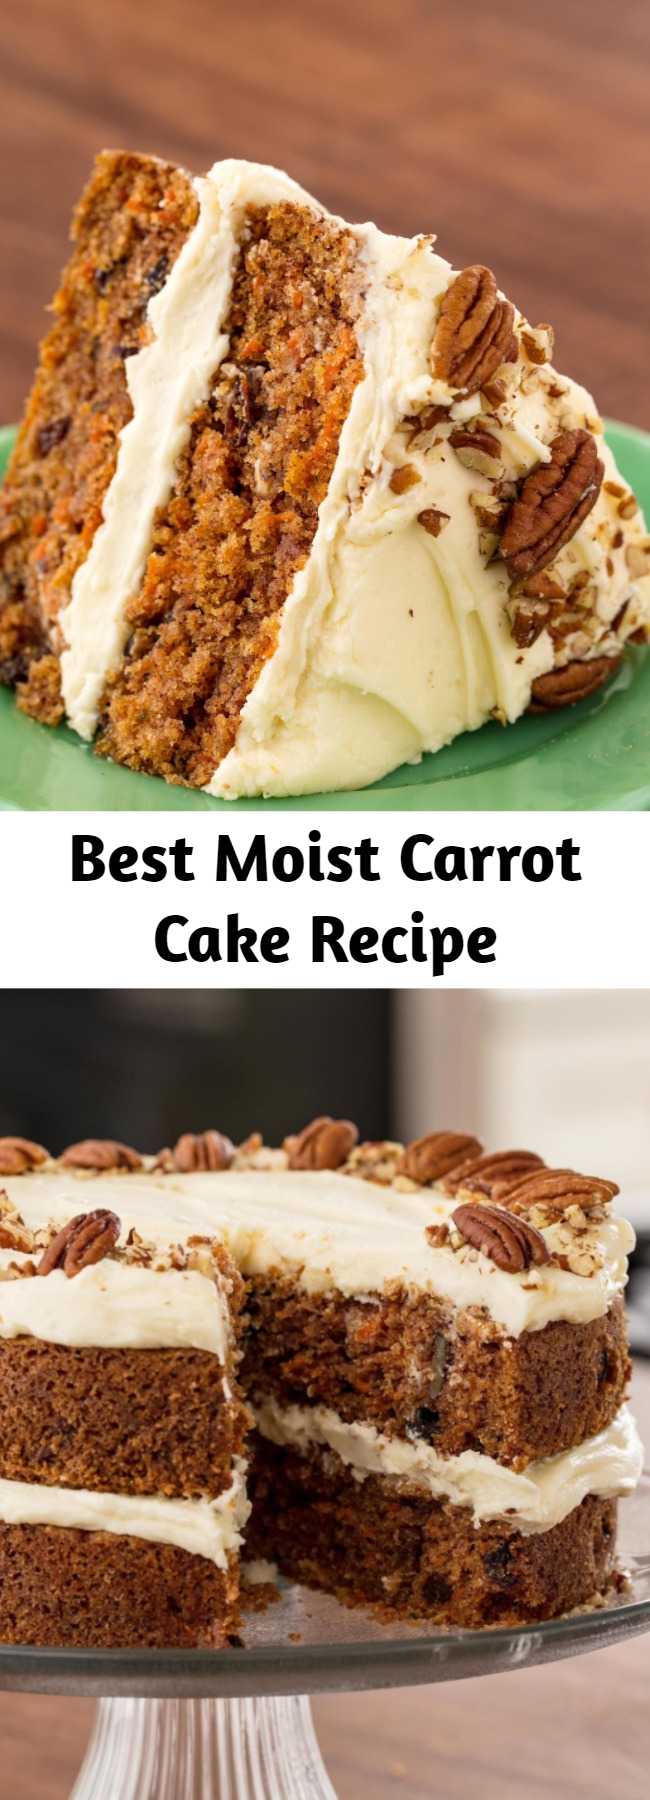 Best Moist Carrot Cake Recipe - This cake was inspired by a generations-old family recipe — you can't beat that. It will be the shining star among all your Easter Desserts this year.